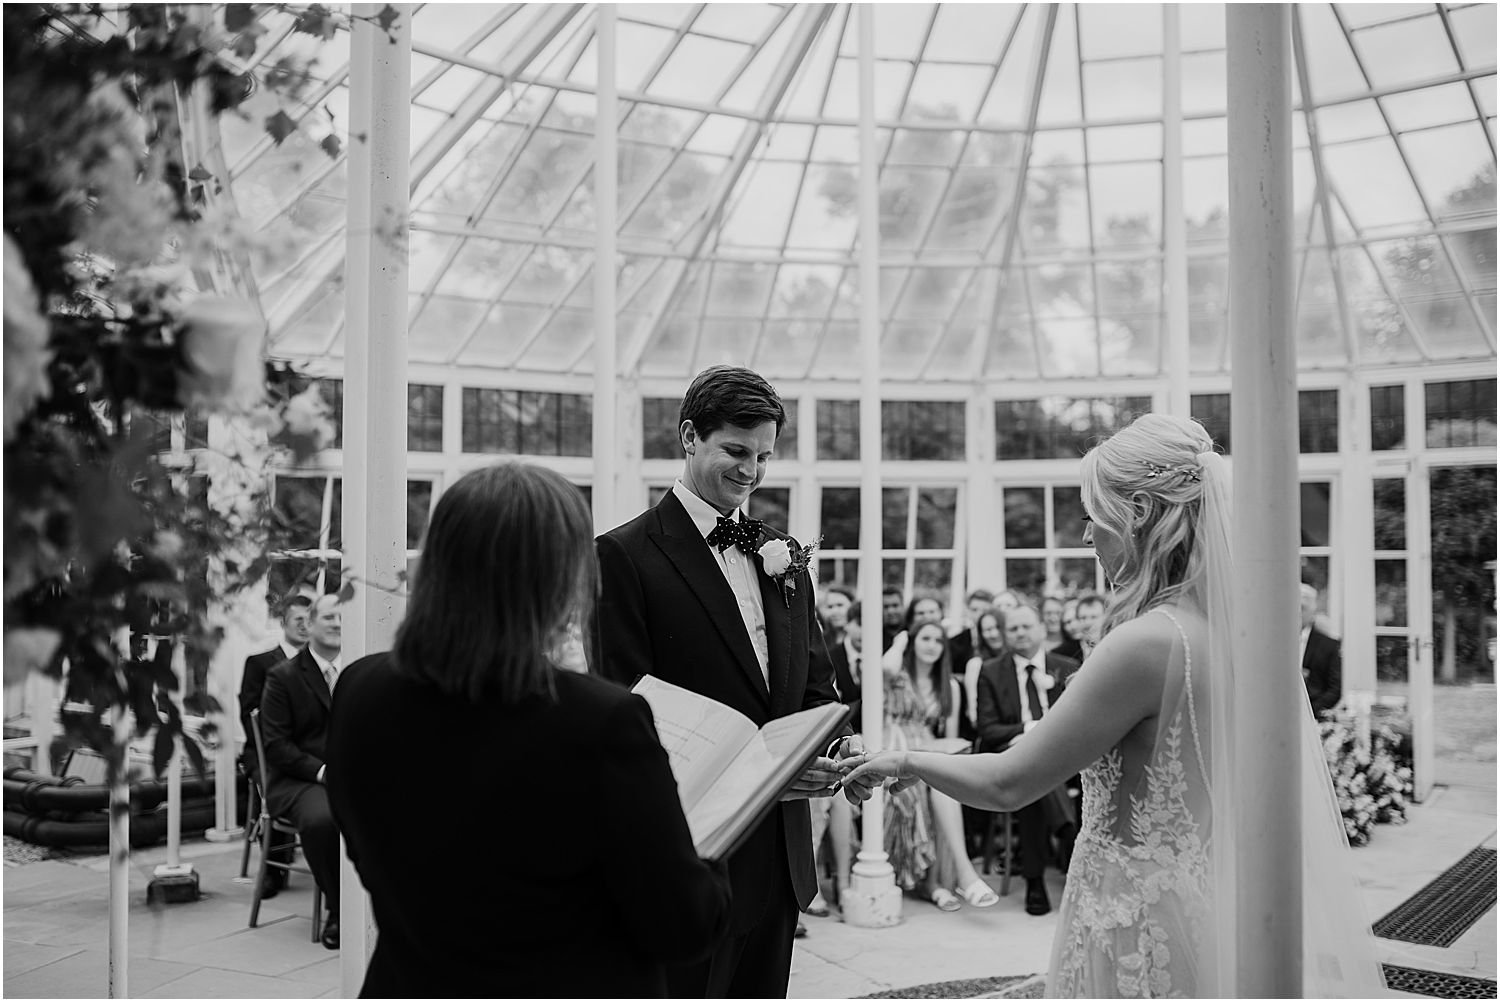 Chiswick House and Gardens Conservatory wedding